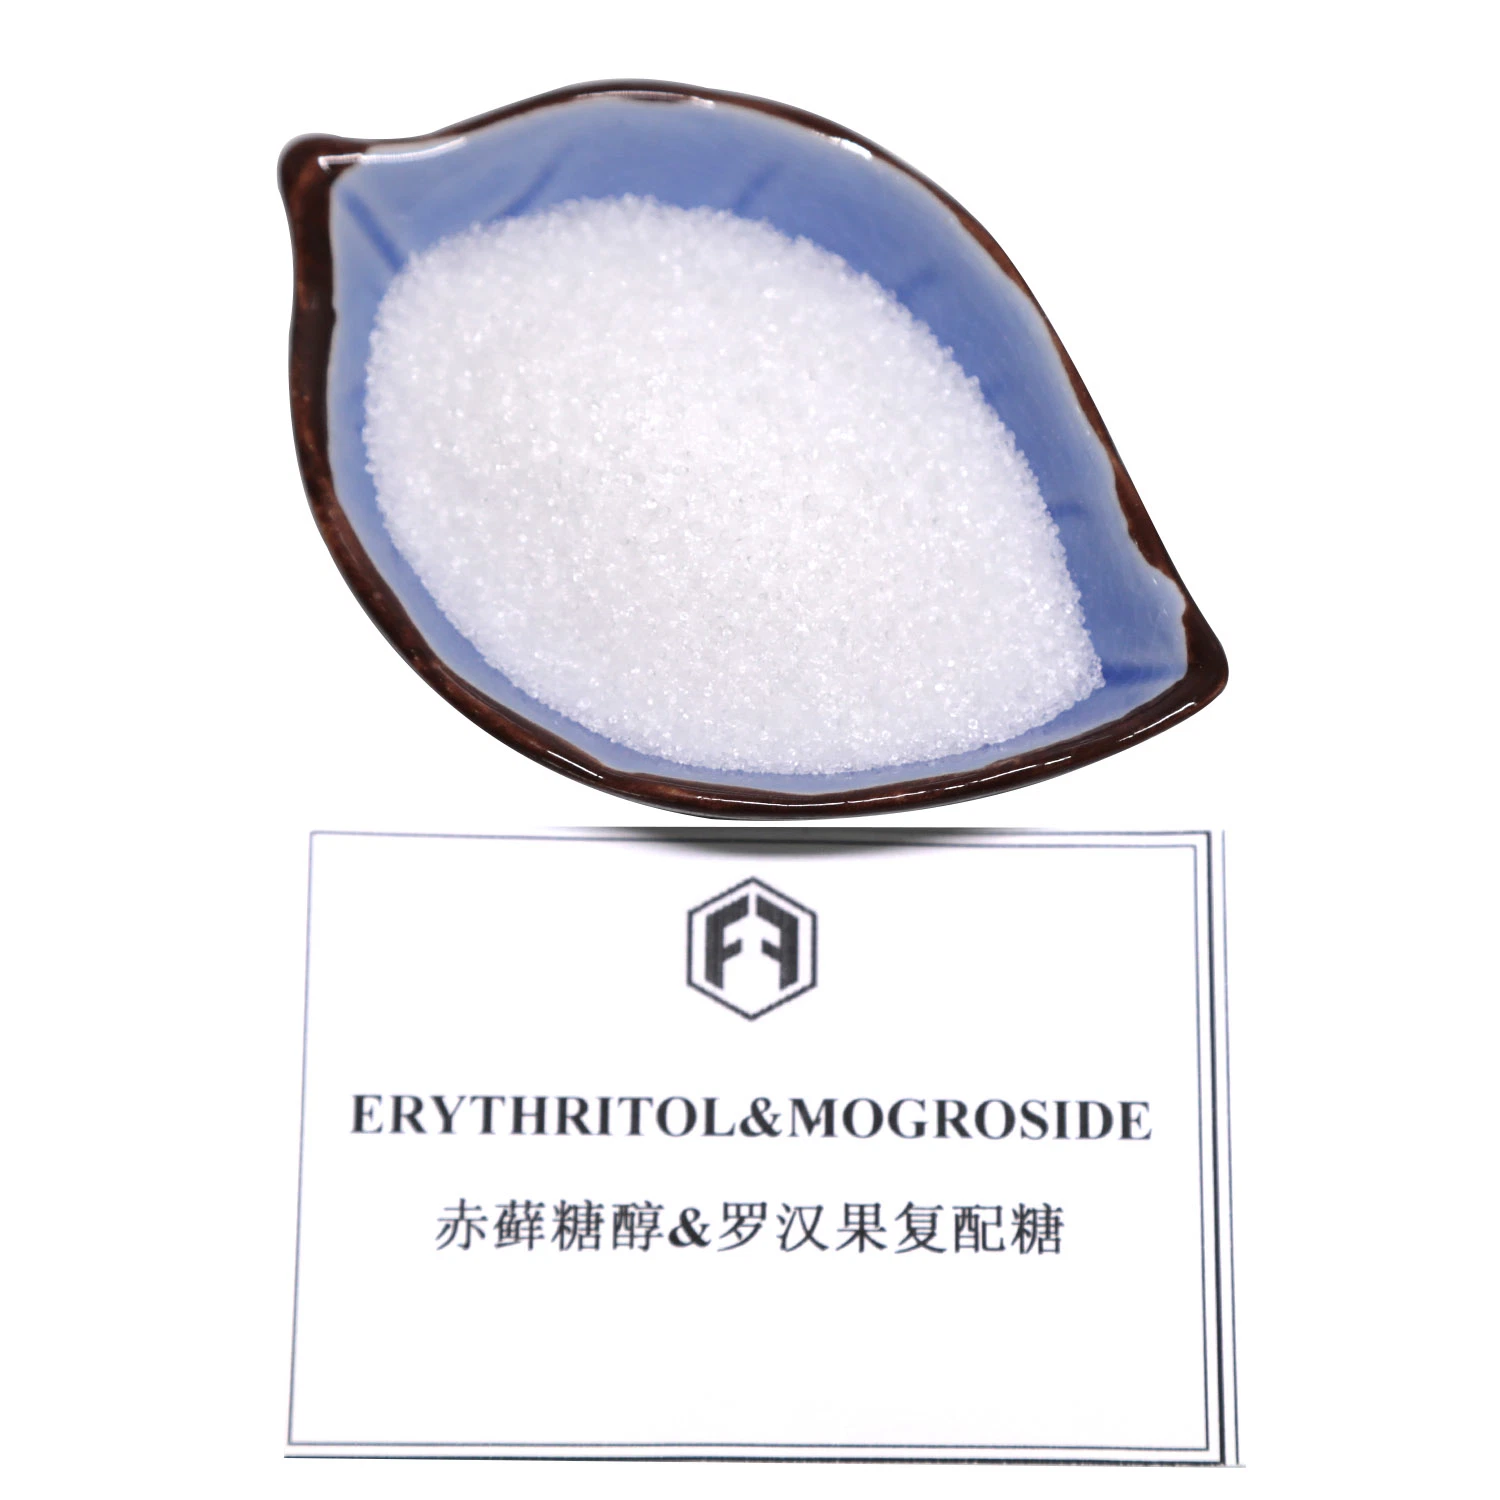 Organic Low Calorie Erythritol Stevia Extract Powder From Sweetener Factory